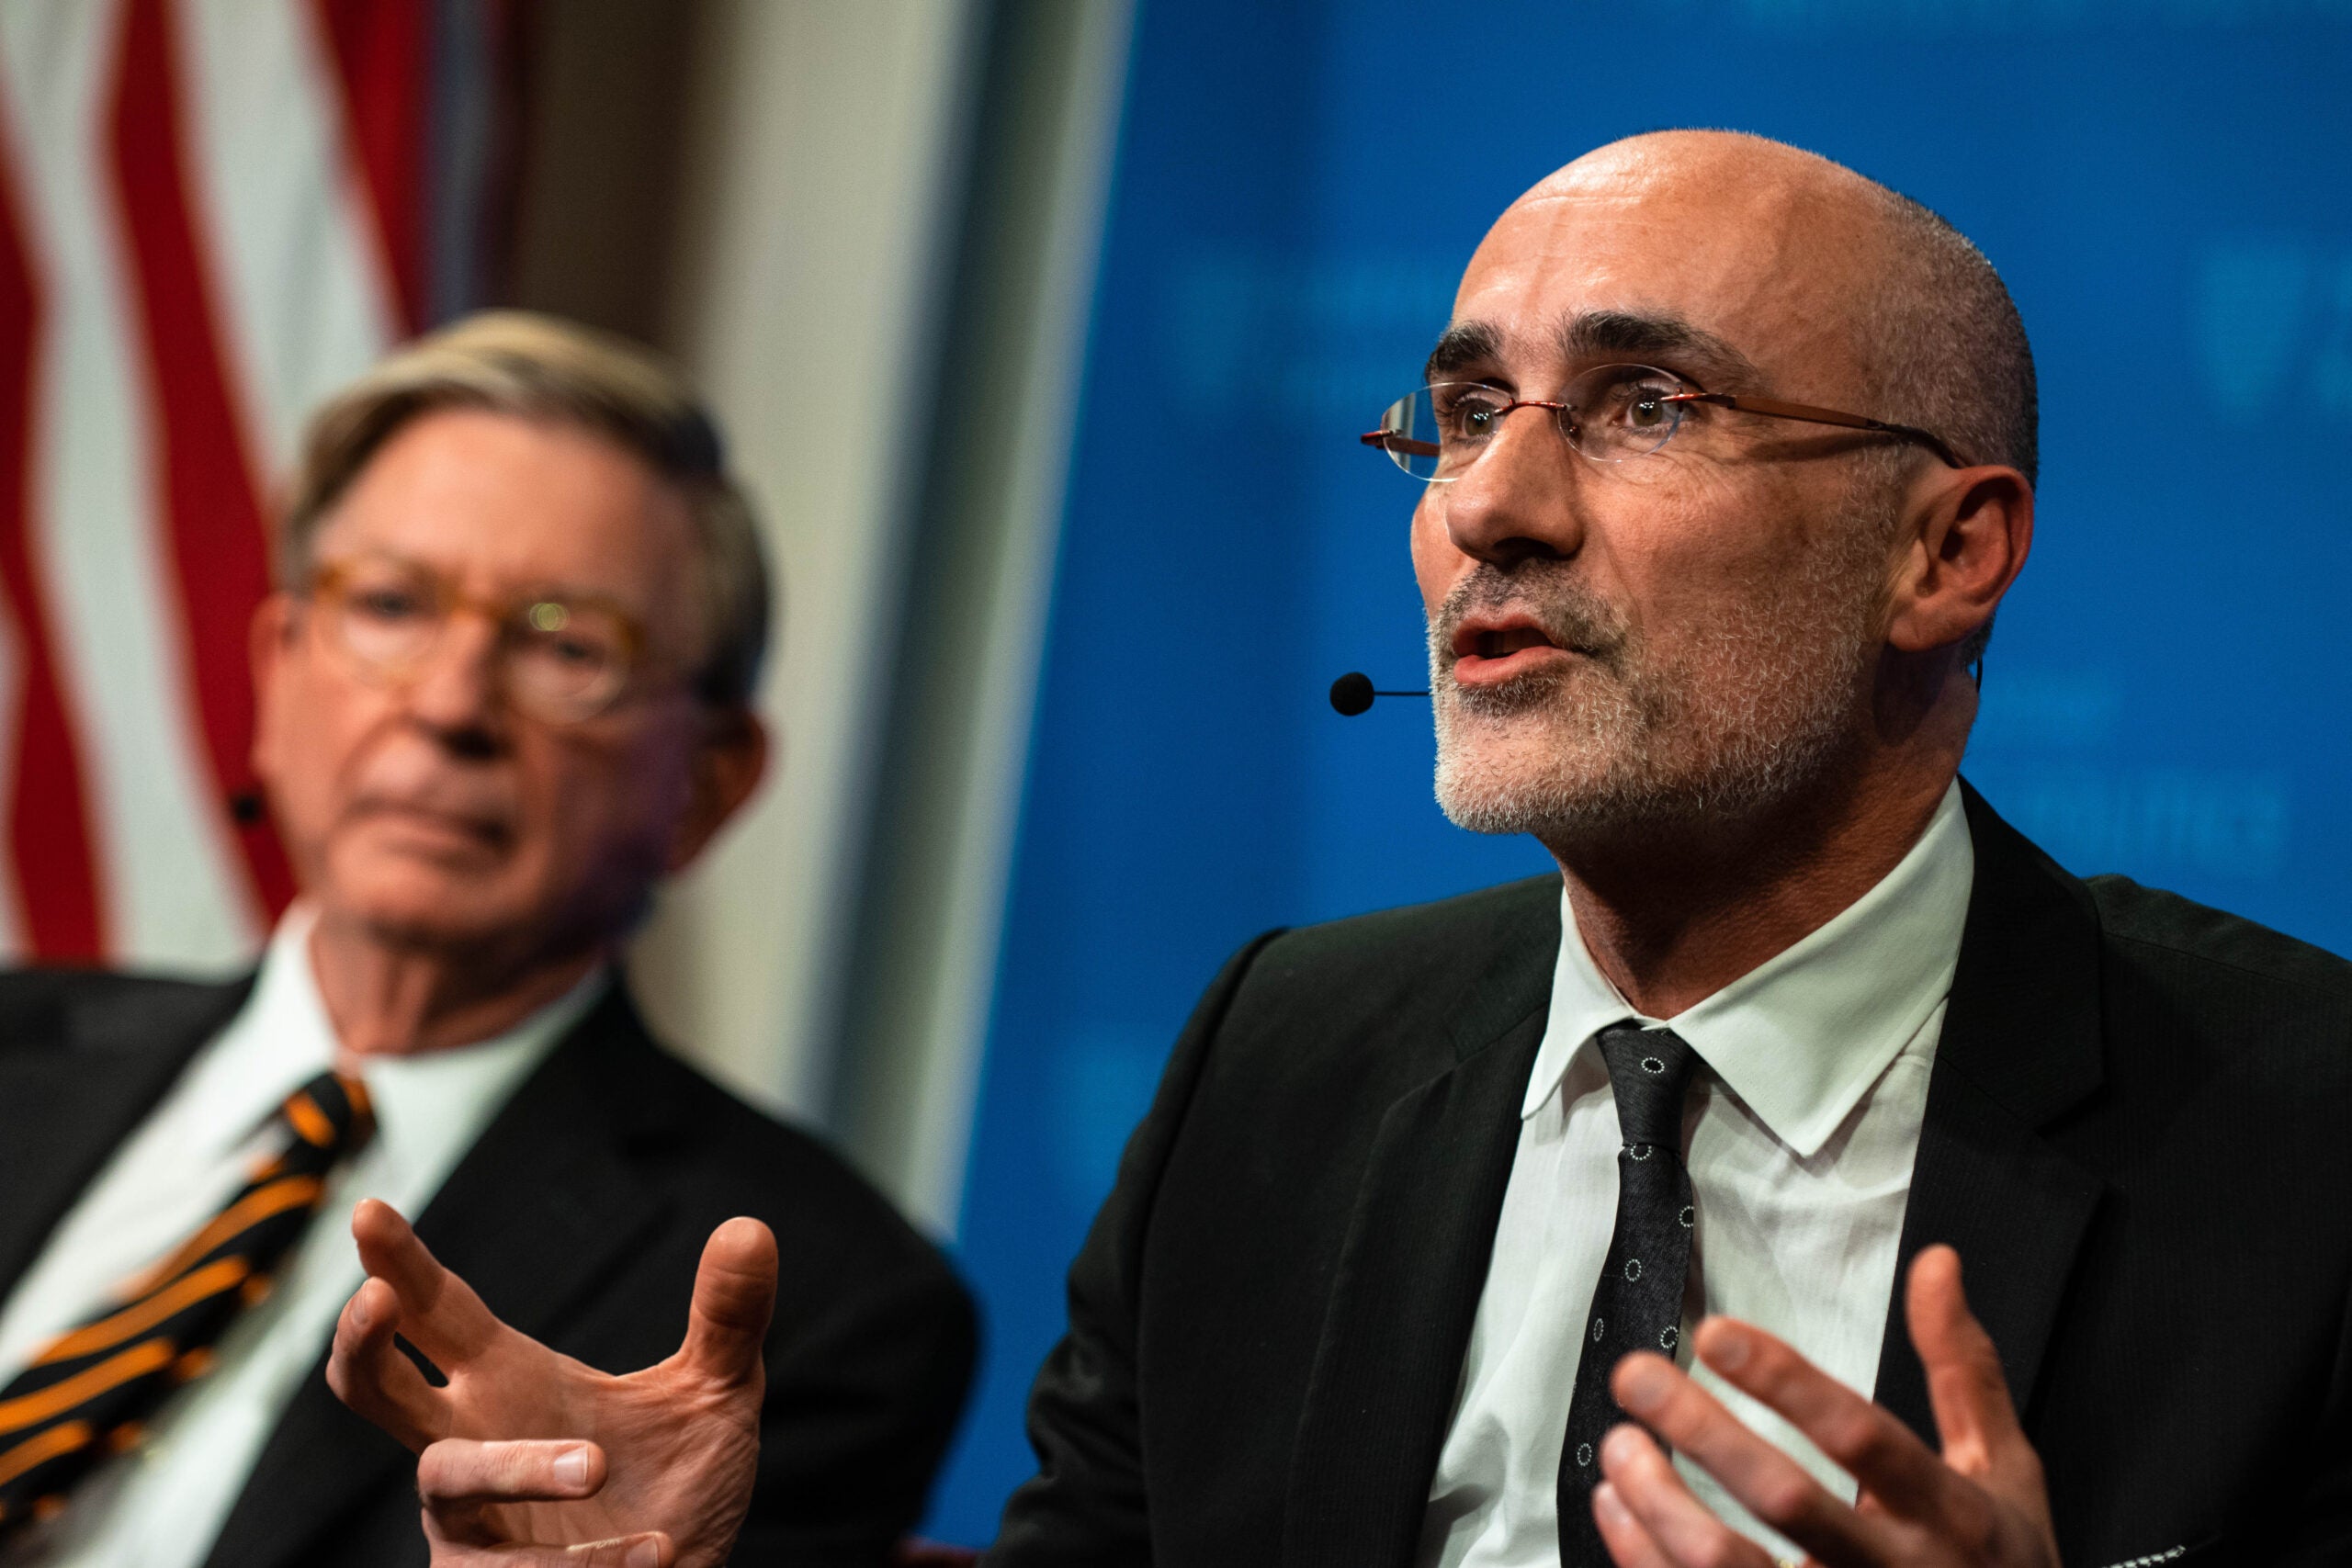 Harvard Kennedy School Professor Arthur Brooks with George Will in the background.